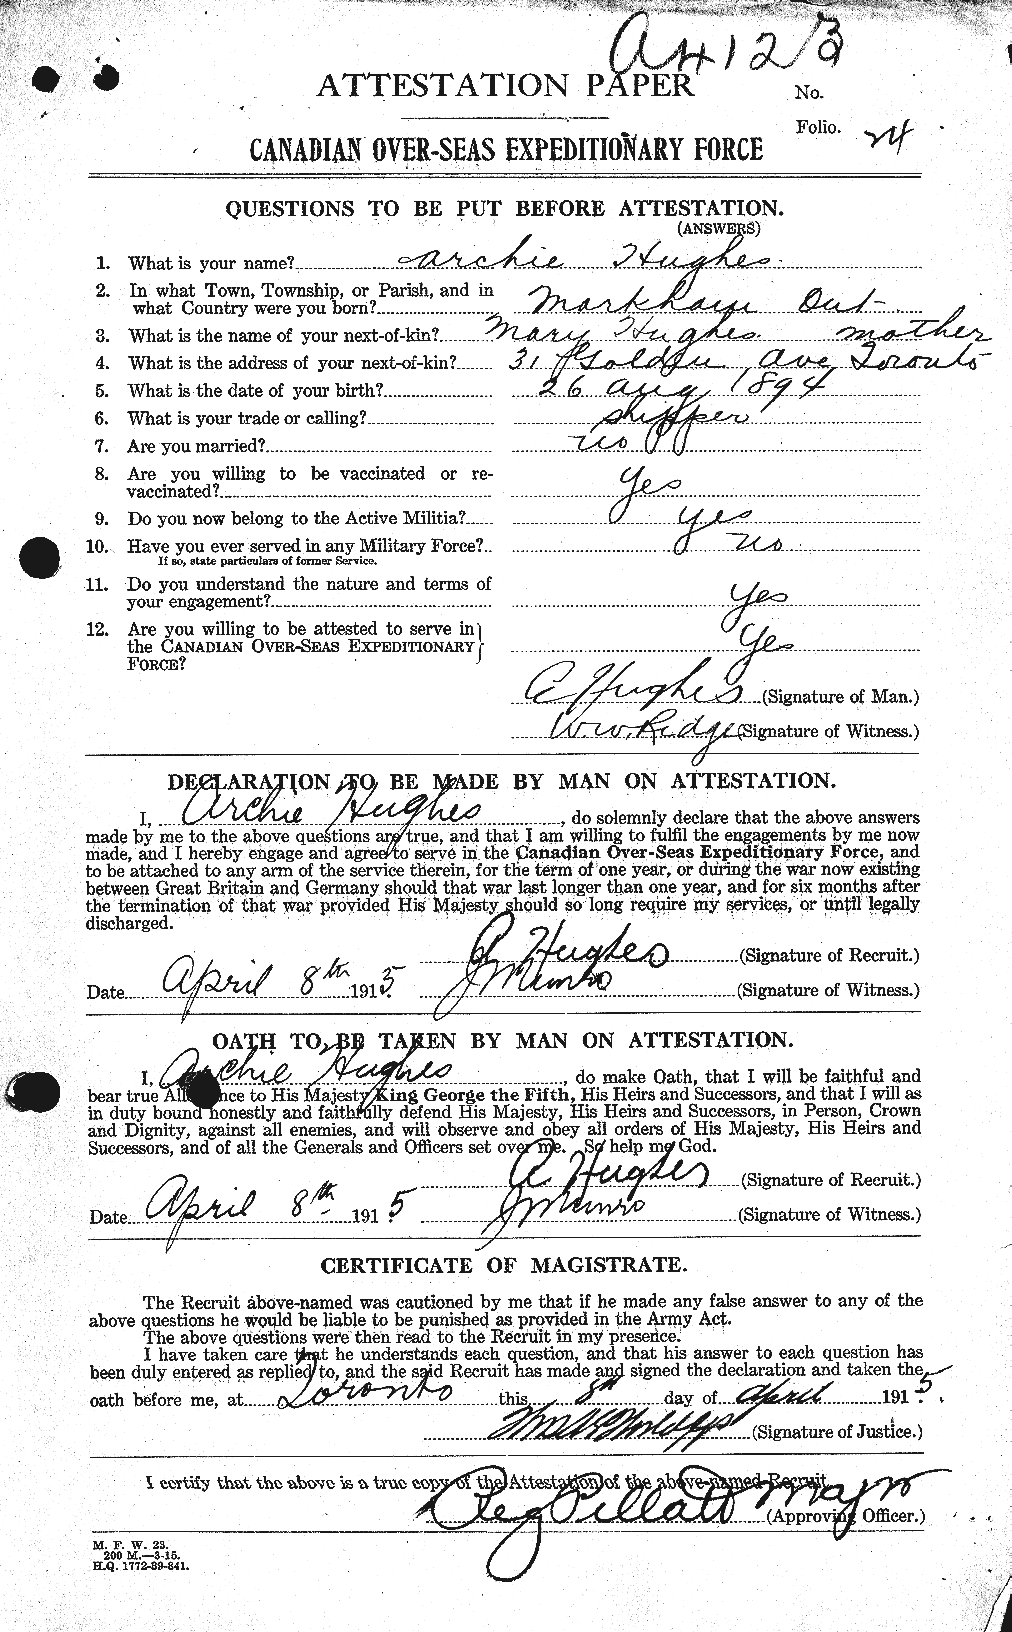 Personnel Records of the First World War - CEF 402554a